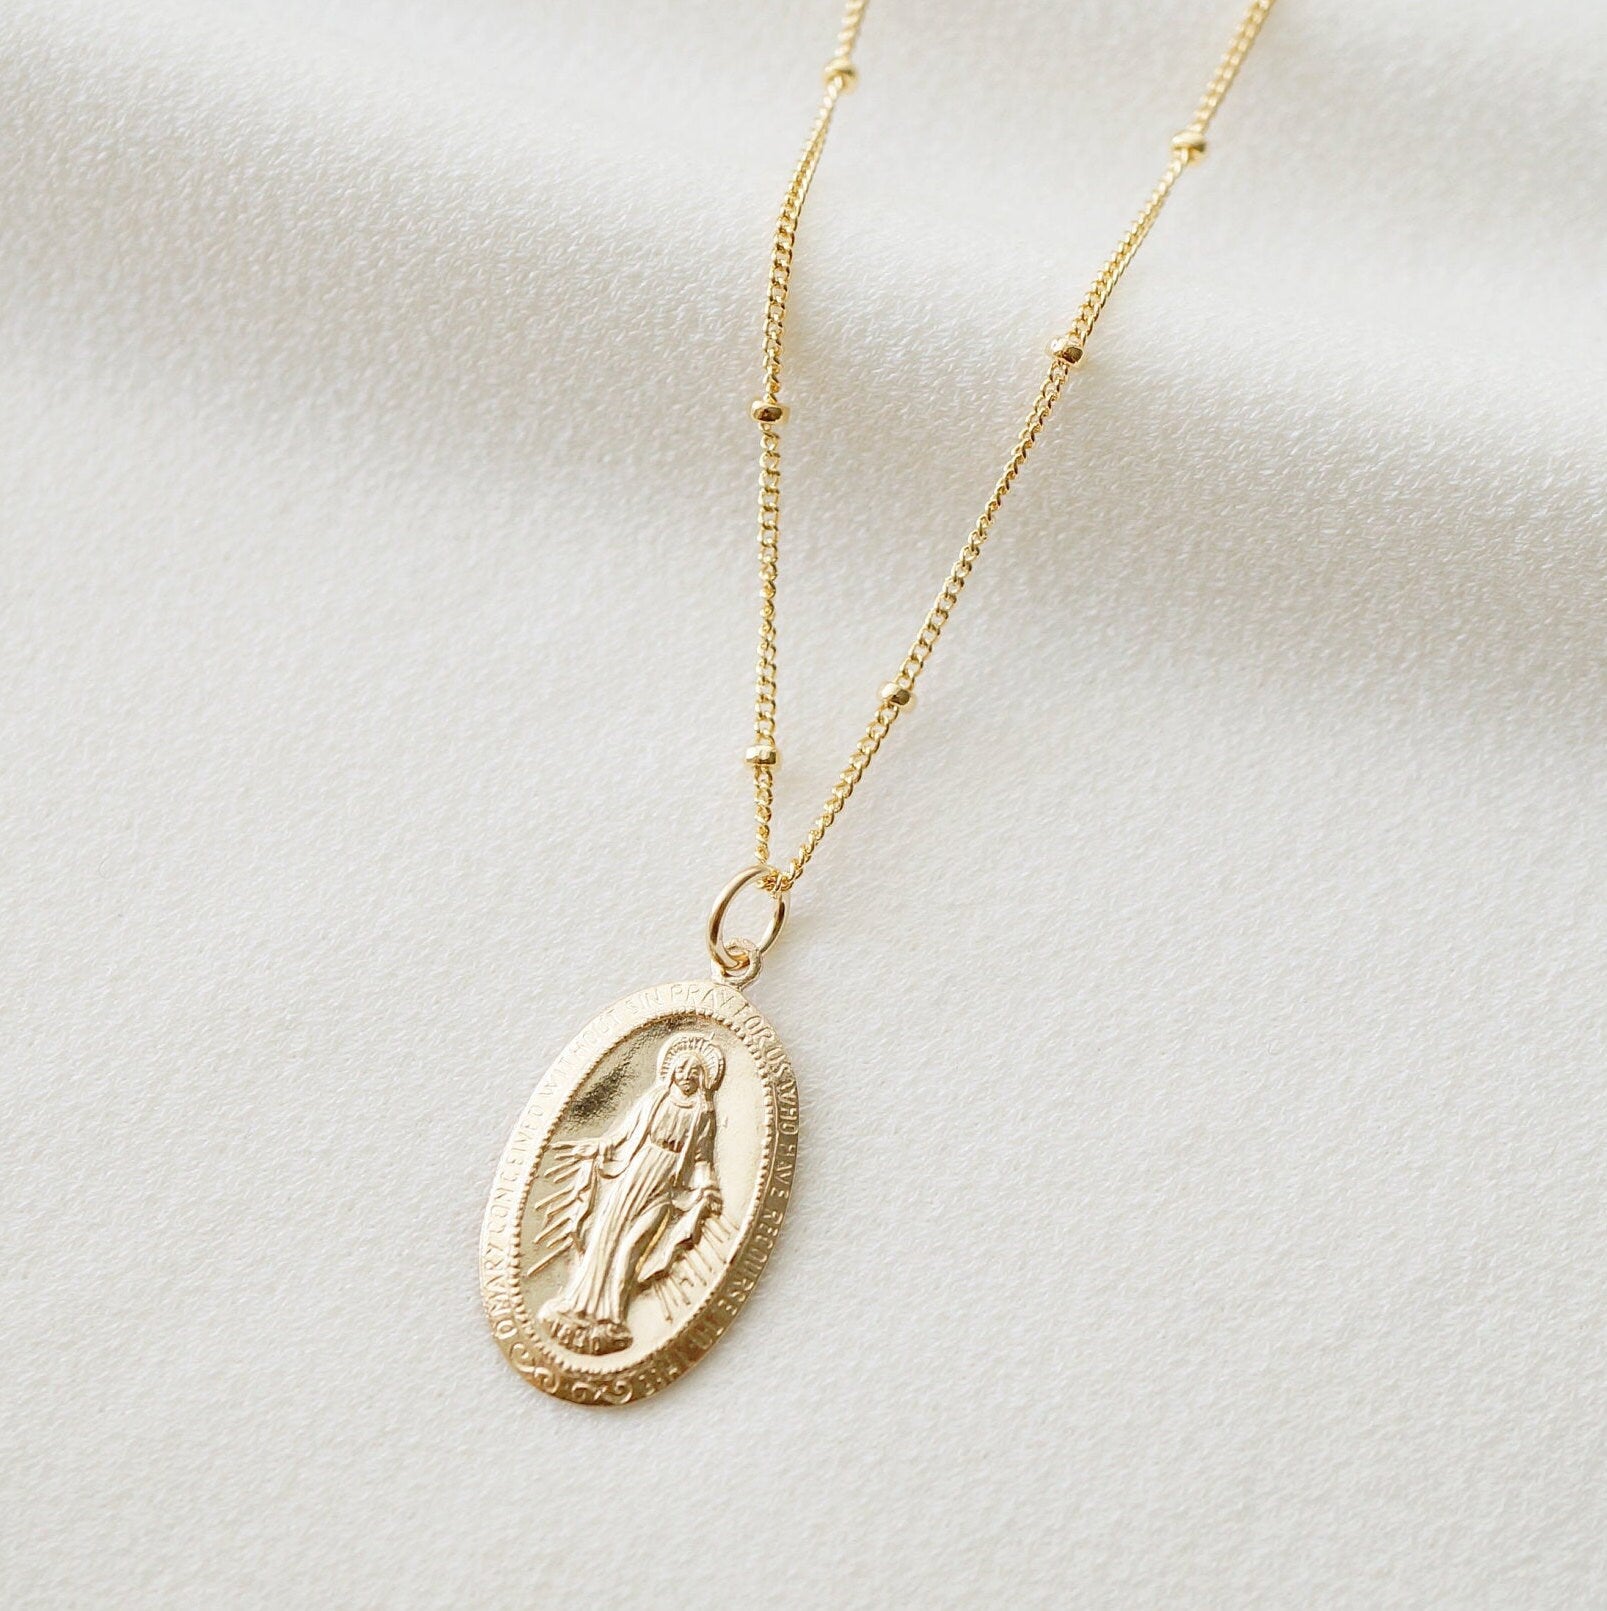 Buy Gift for Her Daughter Sister Gold Virgin Mary Necklace Adult Baptism  Gift Birthday Coin Charm Miraculous Medallion Saint Catholic Religious  Online in India - Etsy